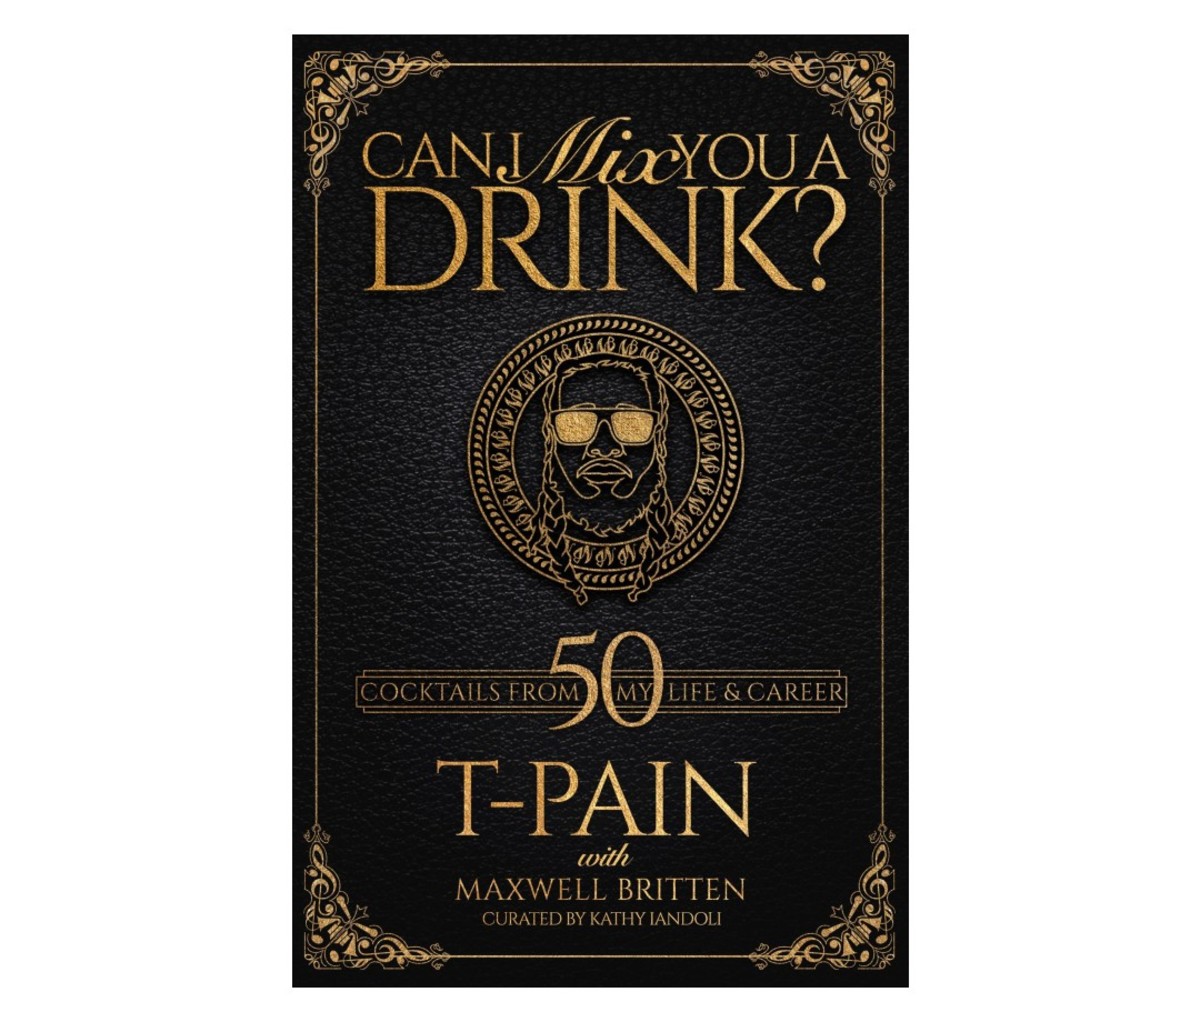 Can I Mix You a Drink? Liquor Guide by T-Pain